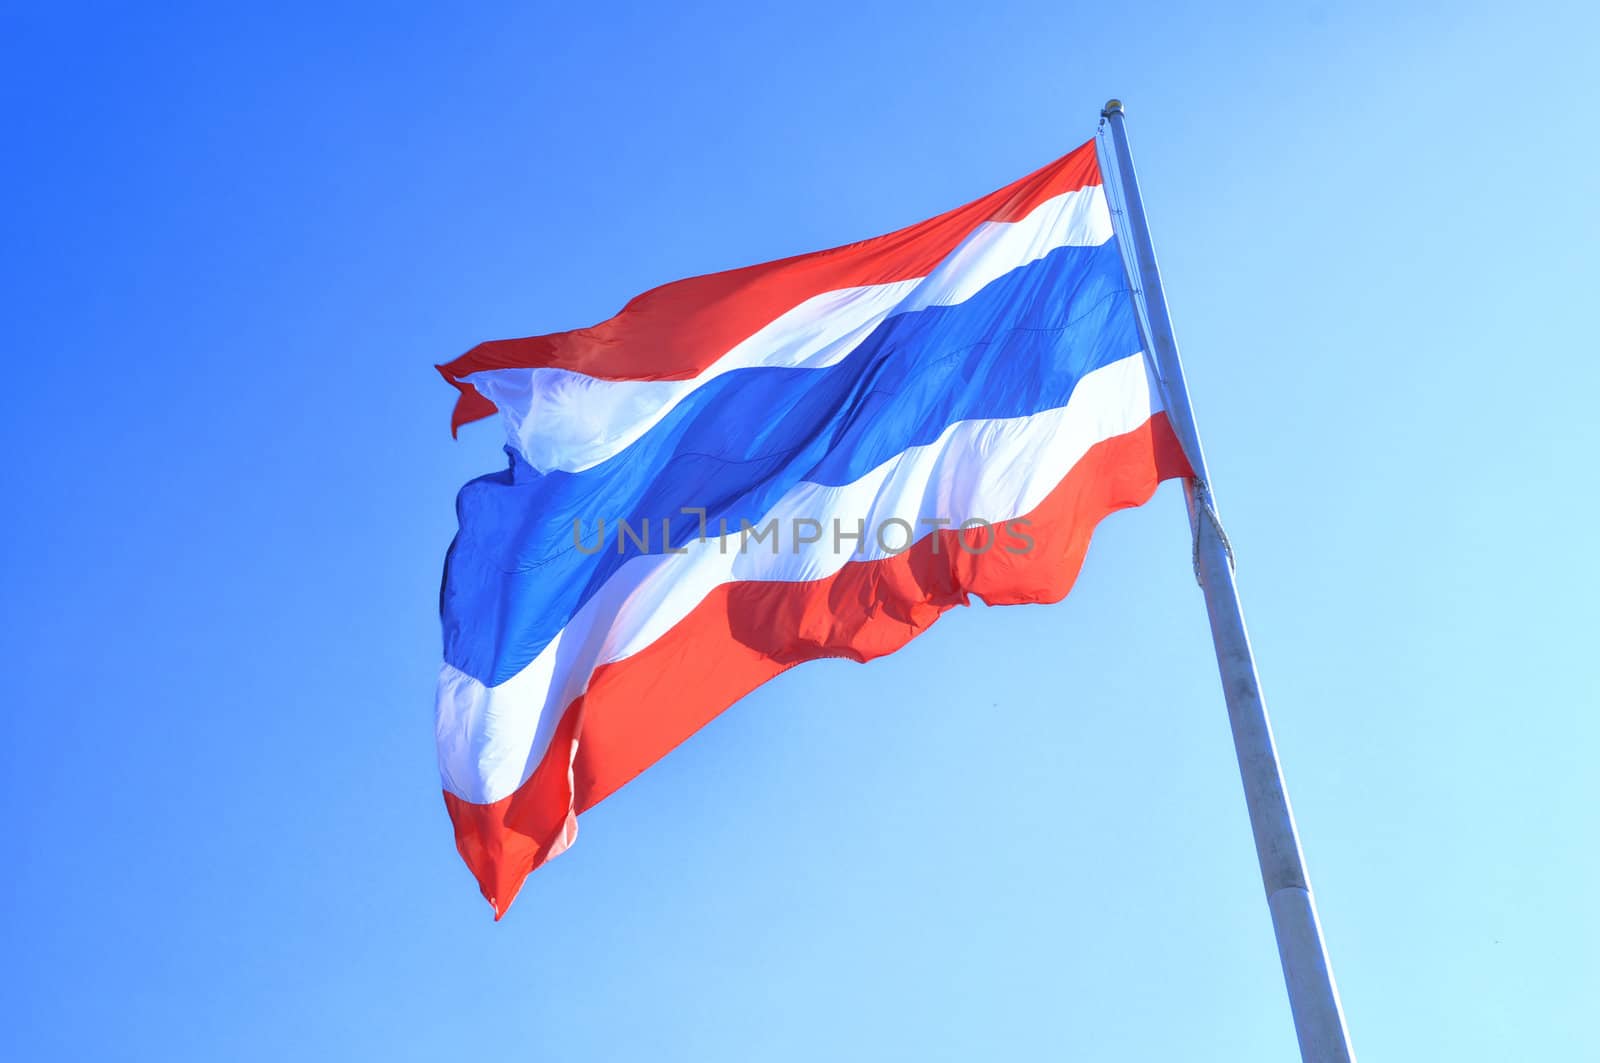 Thailand flag was blowing in the top of the pole.